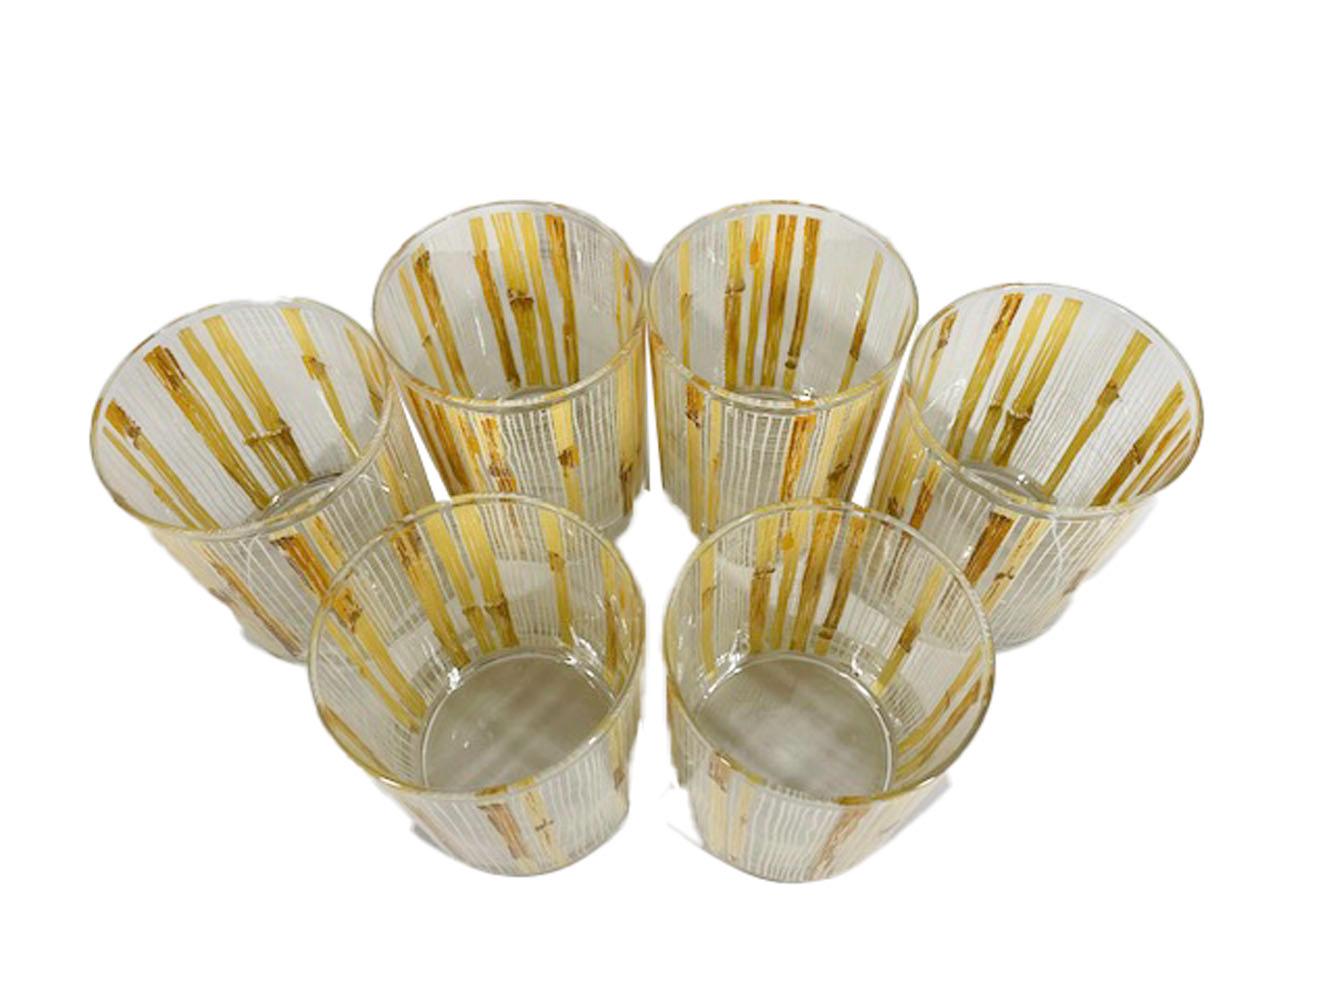 Mid-century rocks glasses made by Cera Glassware and retailed by Neiman-Marcus having a pattern of dried bamboo stocks on a loose-weave mesh ground executed in white, tan and brown enamel.